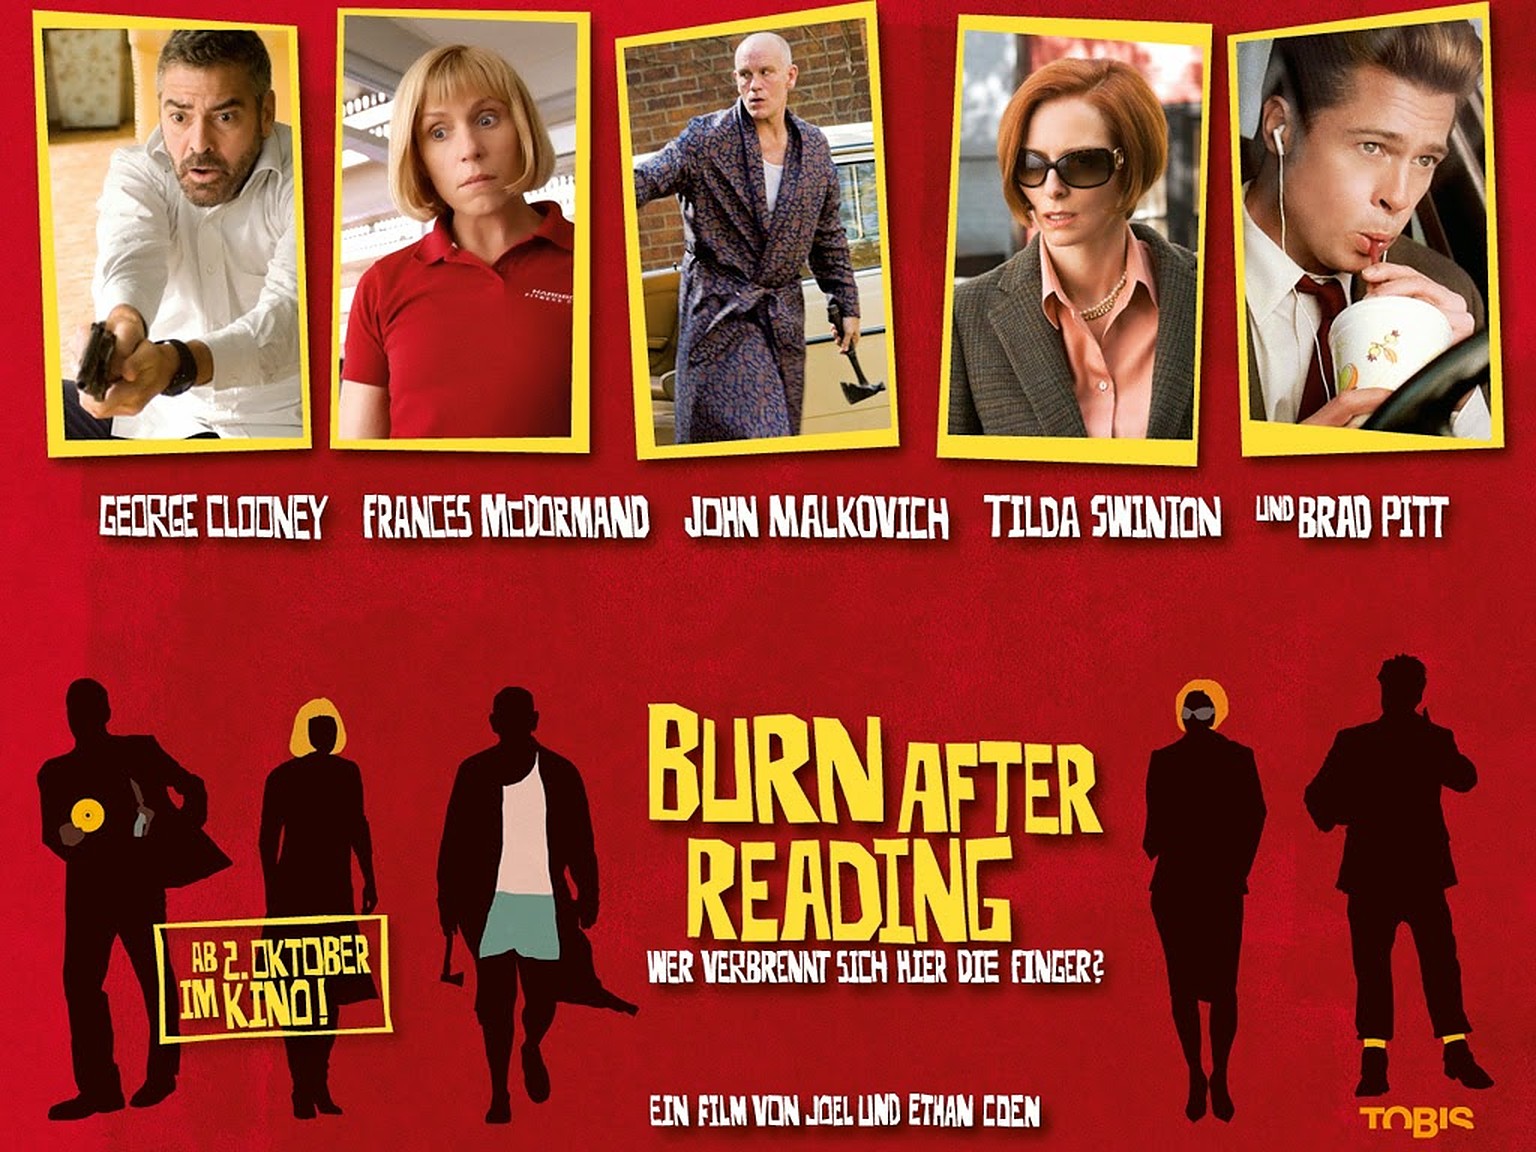 39-facts-about-the-movie-burn-after-reading